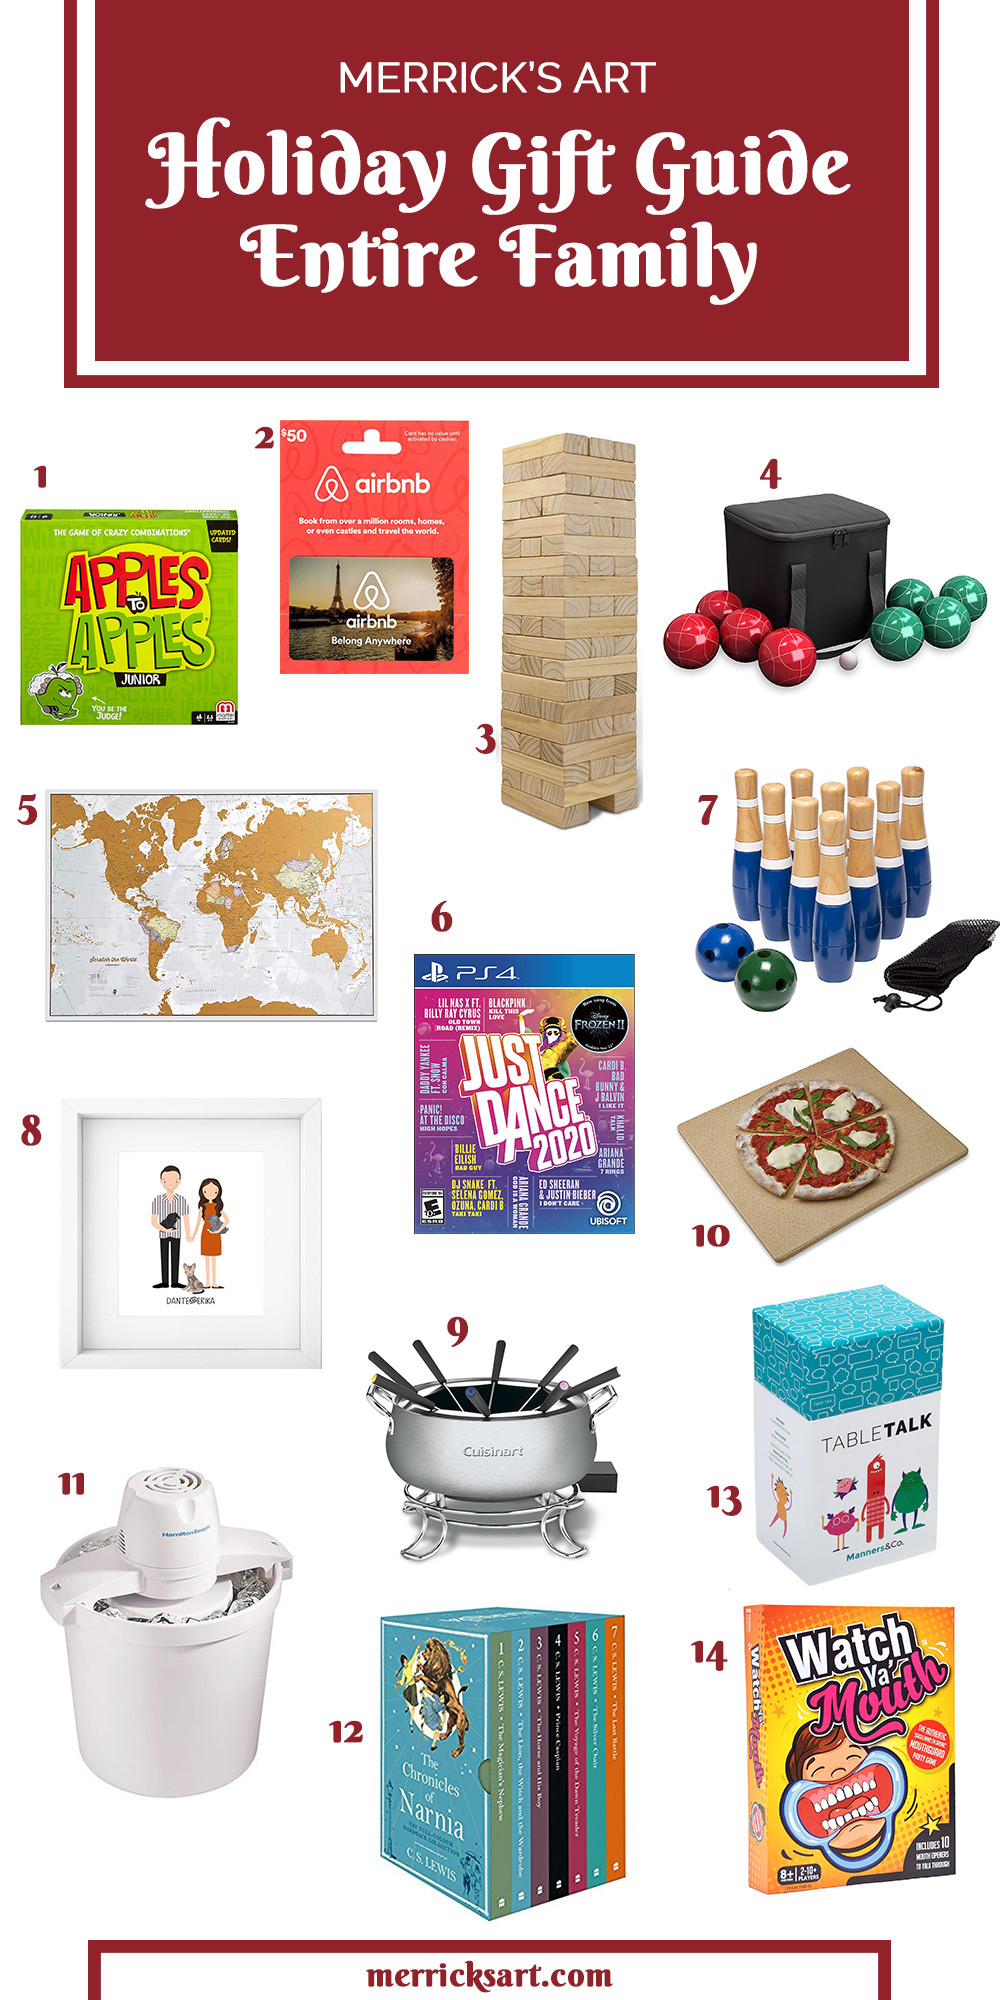 Holiday Gift Ideas Family
 Family Christmas Gifts Ideas for an Entire Family